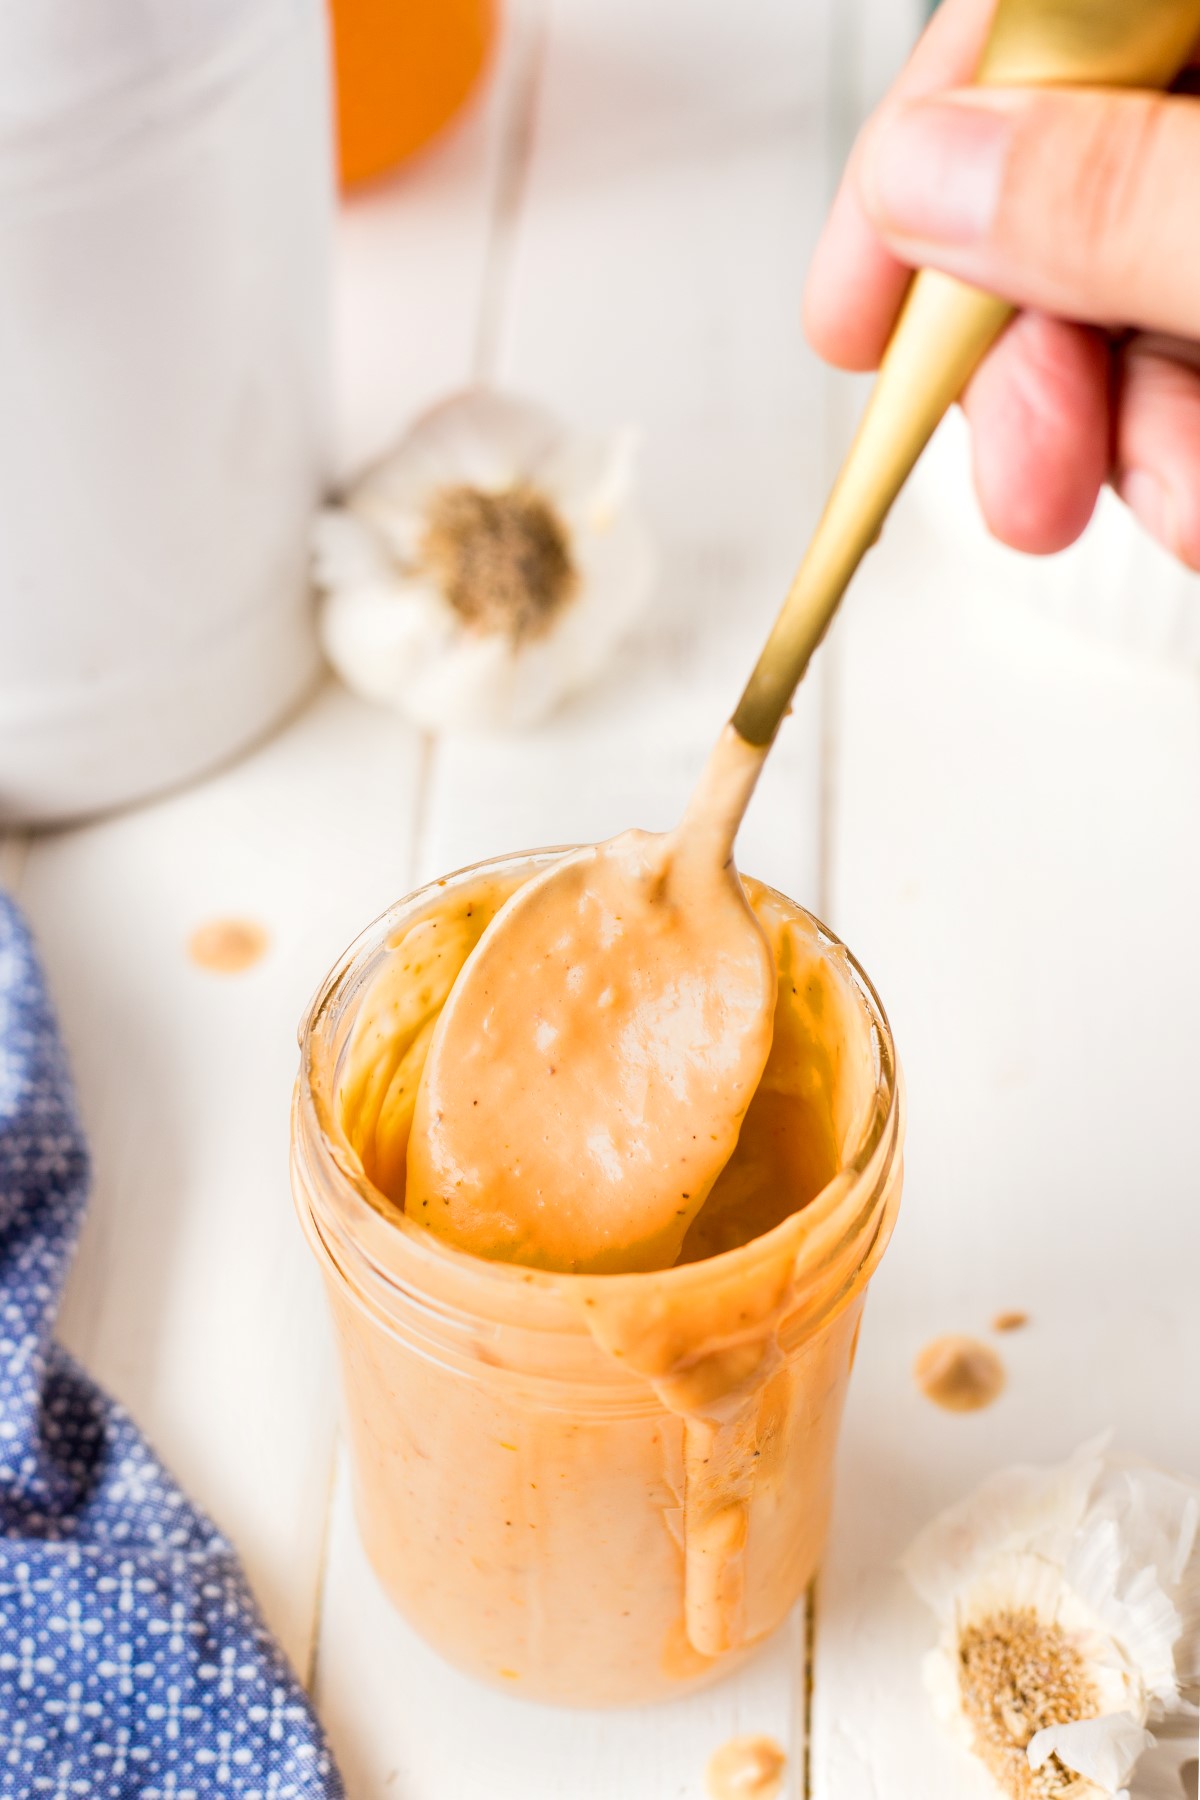 A spoon covered in donkey sauce coming out of a mason jar filled with the donkey sauce.